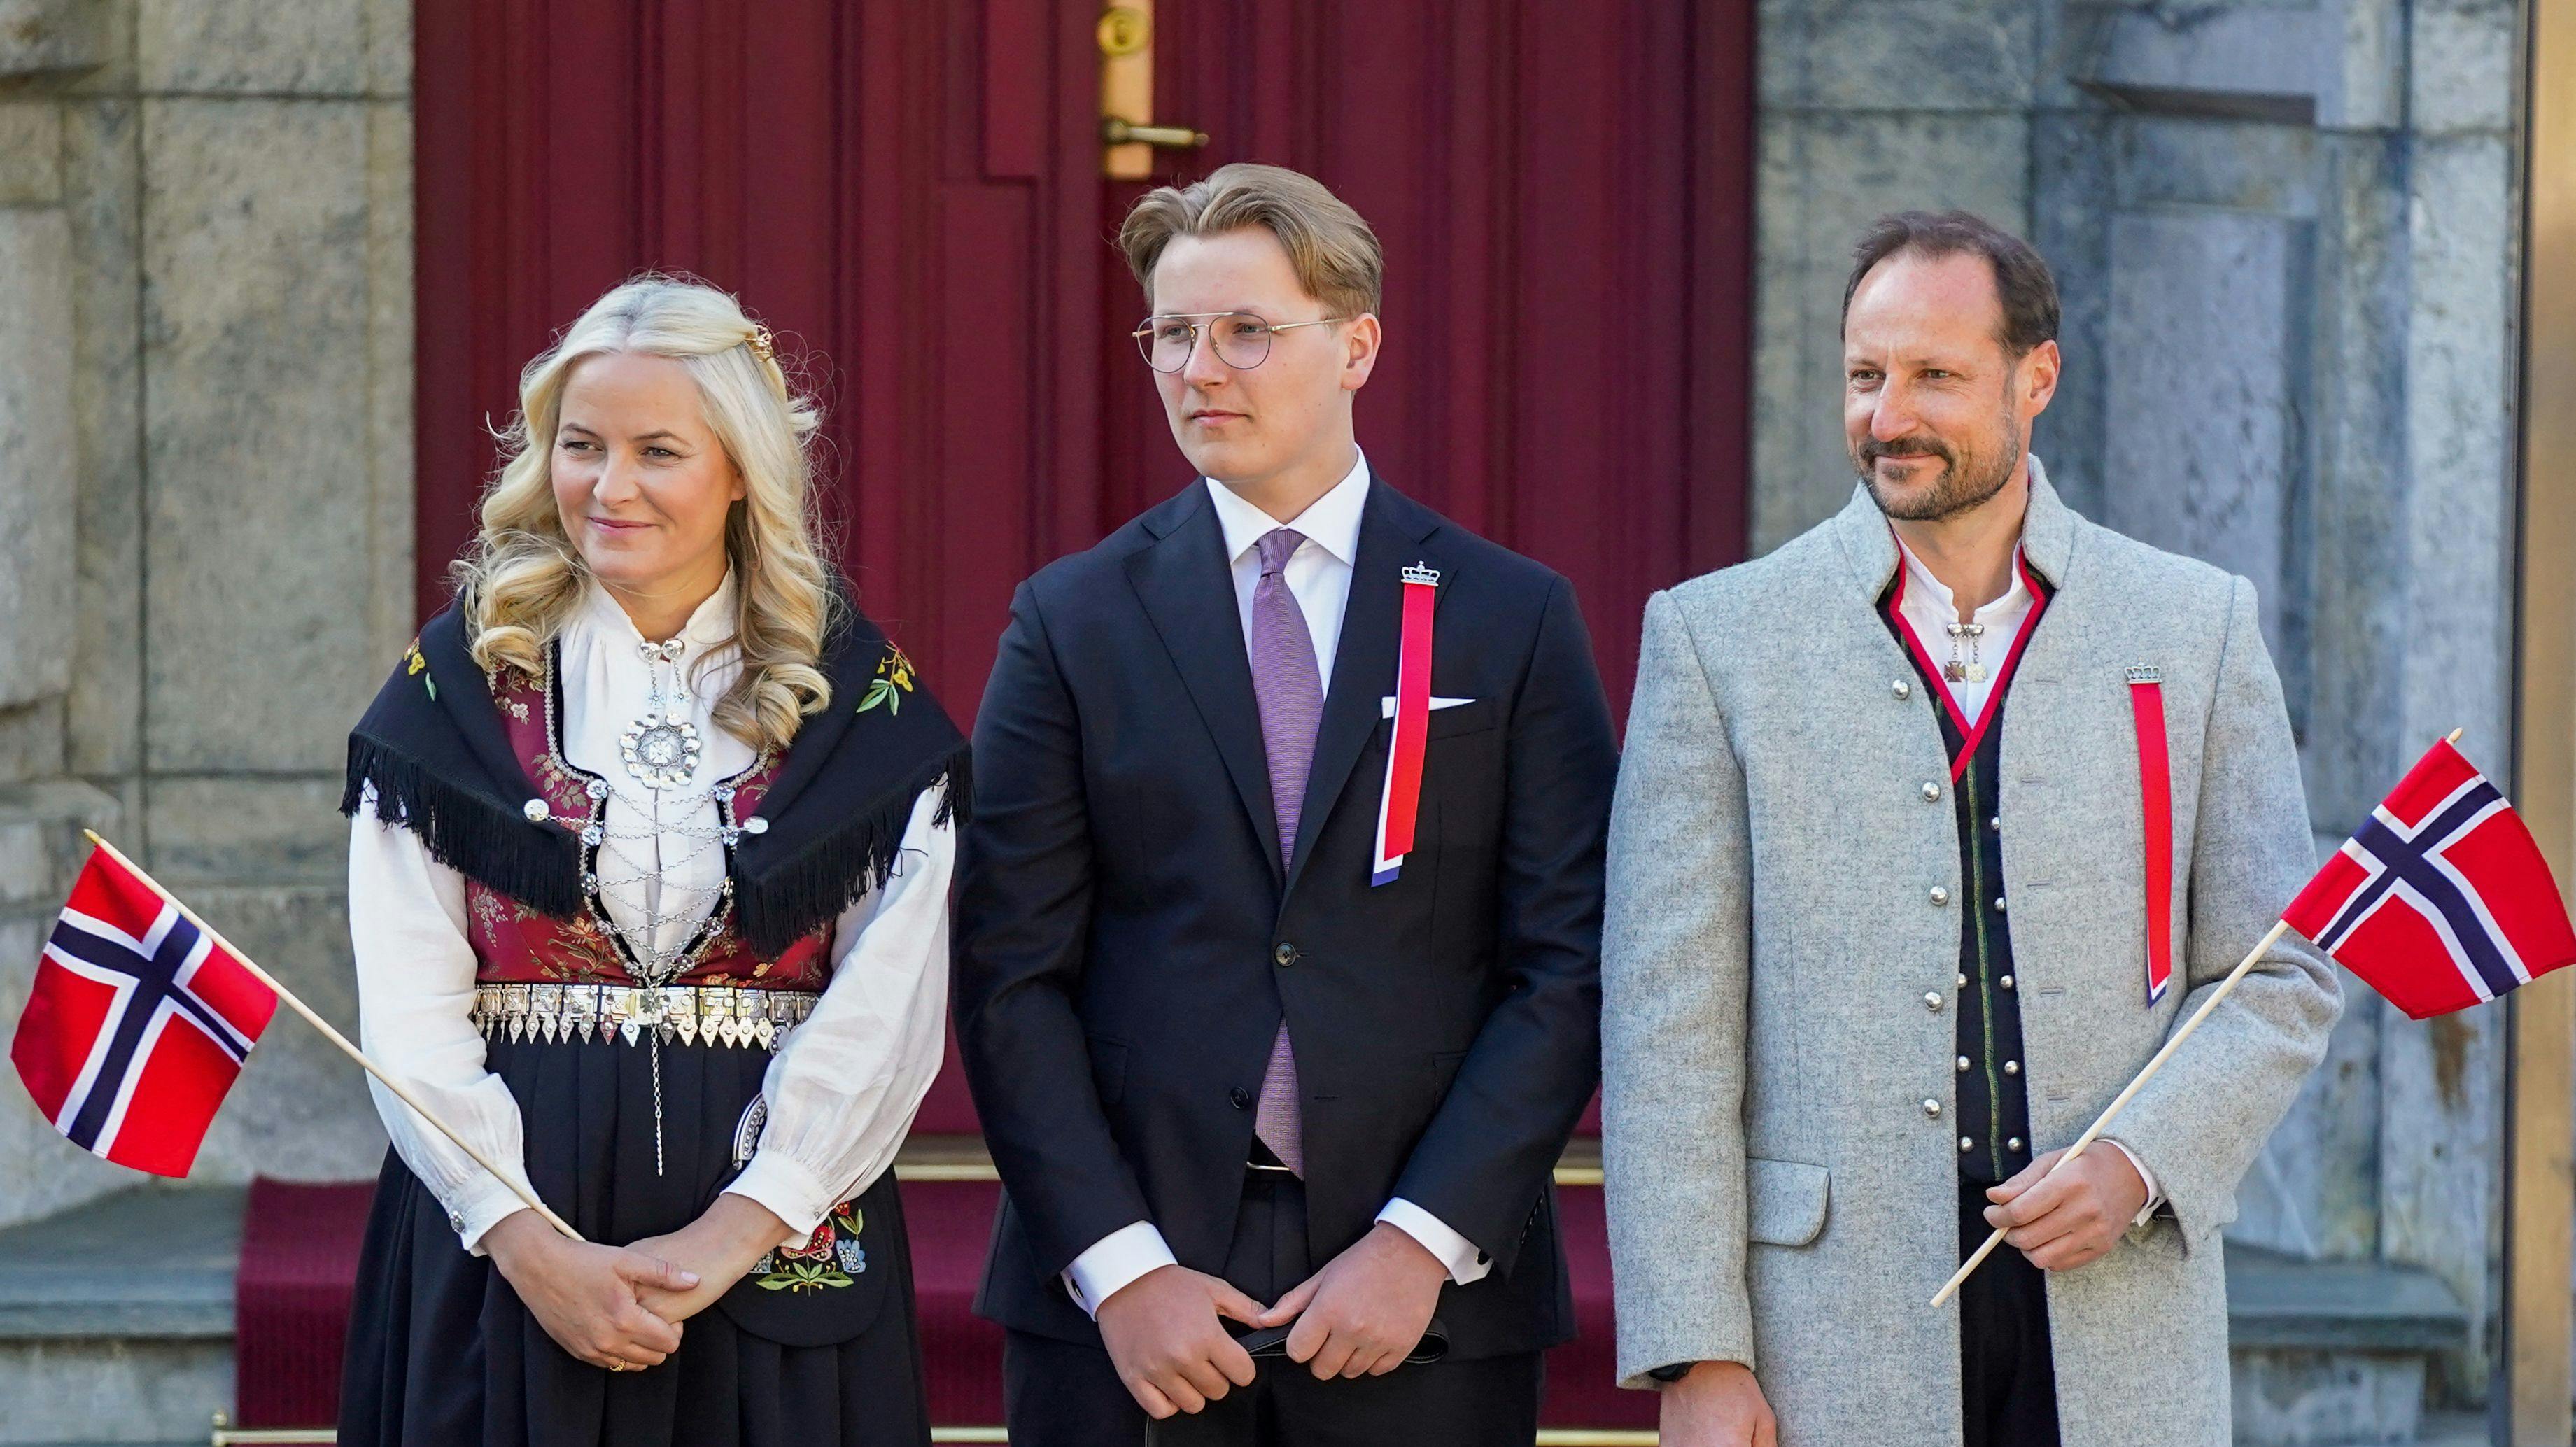 (L-R) Norway's Crown Princess Mette-Marit, Prince Sverre Magnus and Crown Prince Haakon greet and watch the children's parade during the May 17th celebrations at the royal residence Skaugum, in Asker, near Oslo.. (Photo by Lise Åserud / NTB / AFP) / Norway OUT